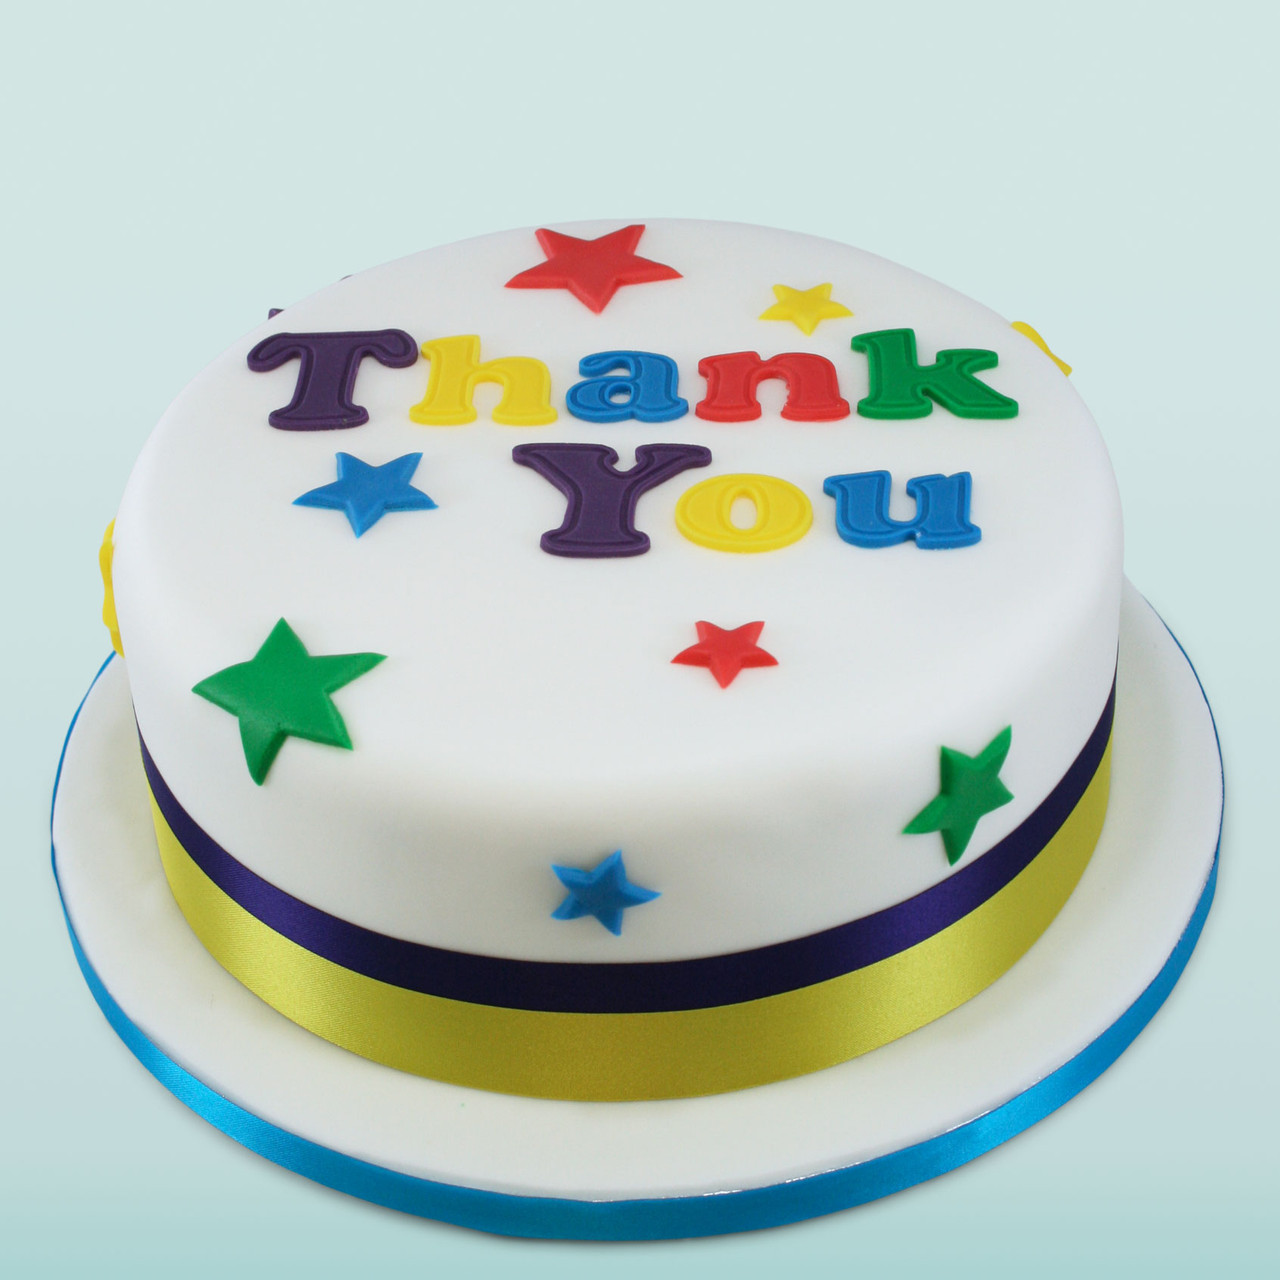 Buy/Send Delicious Thank You Chocolate Cake Online @ Rs. 1499 - SendBestGift